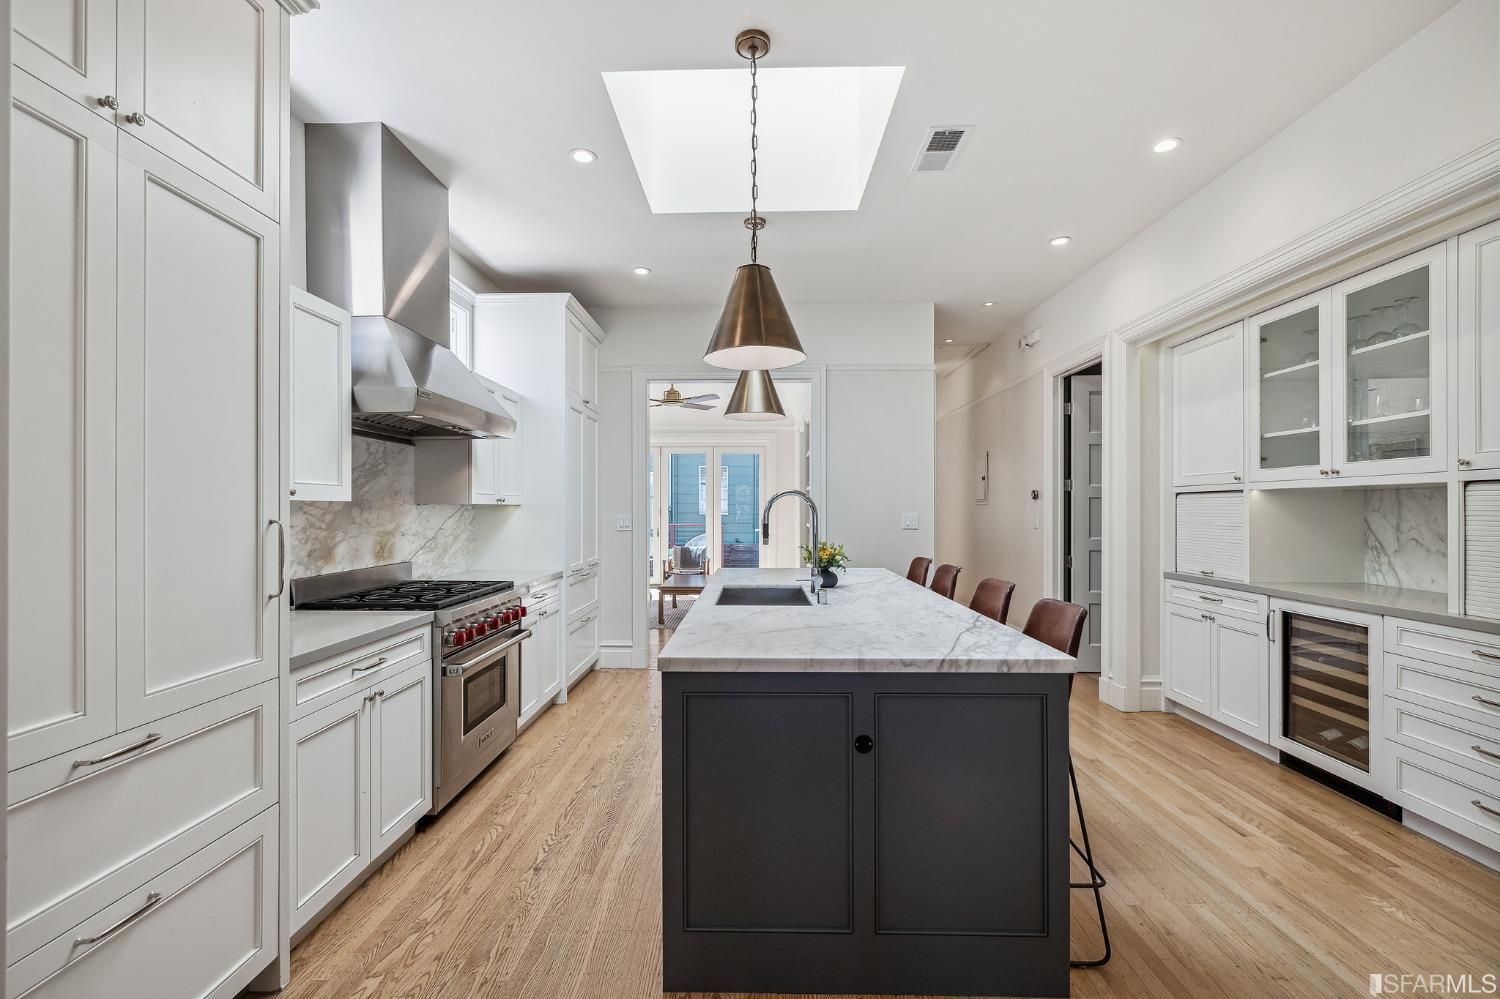 Property Photo: View of the kitchen at 286 Fair Oaks St, showing a large skylight, modern lighting and wood floors